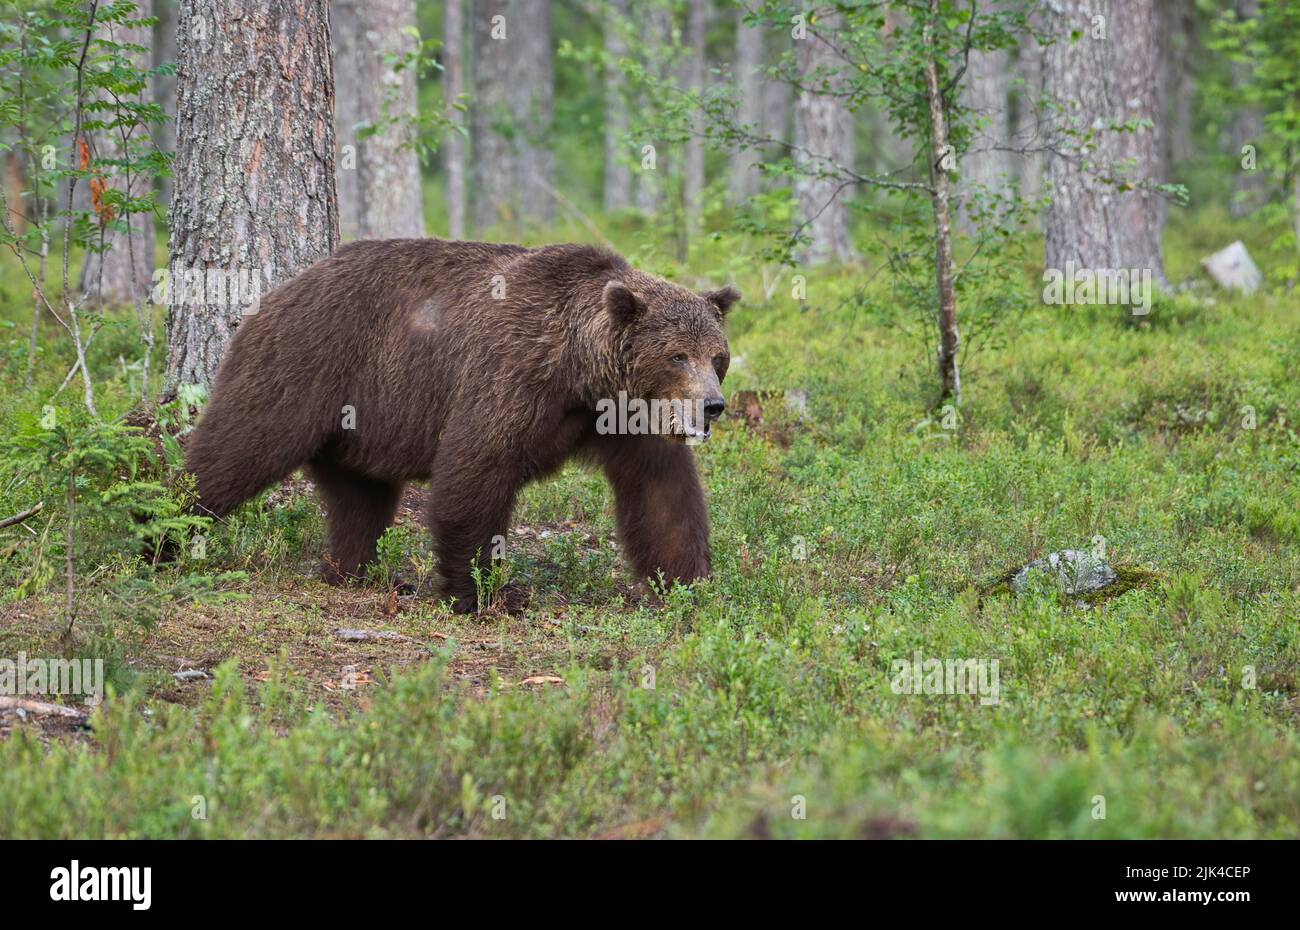 Brown bear (Ursus arctos) photographed in the taiga forest of Finland Stock Photo